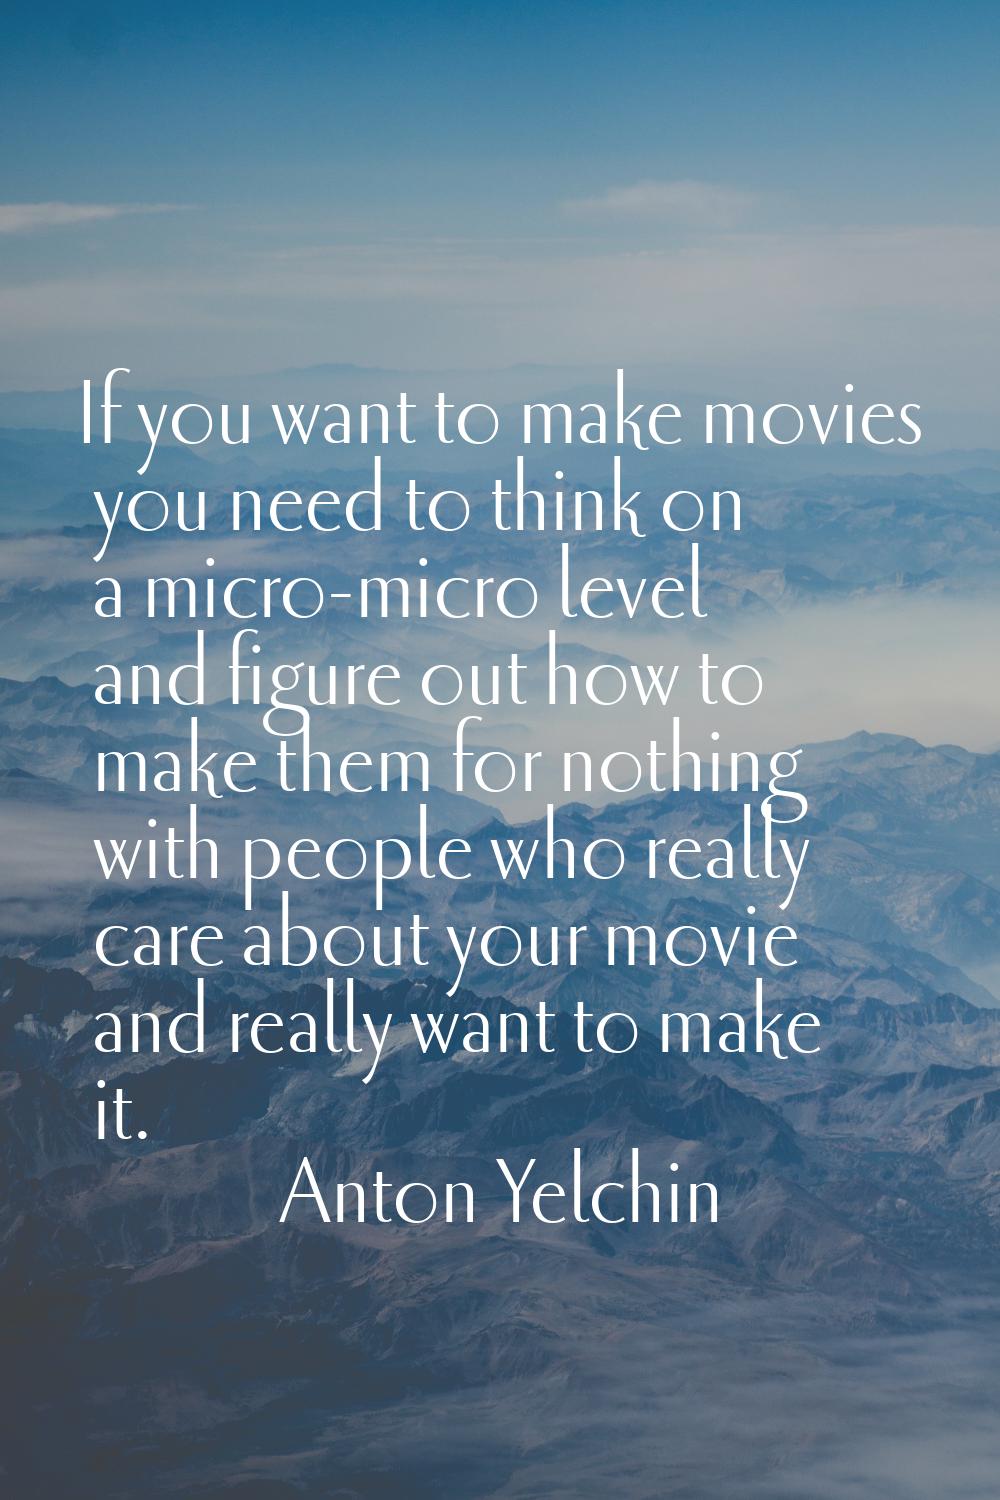 If you want to make movies you need to think on a micro-micro level and figure out how to make them